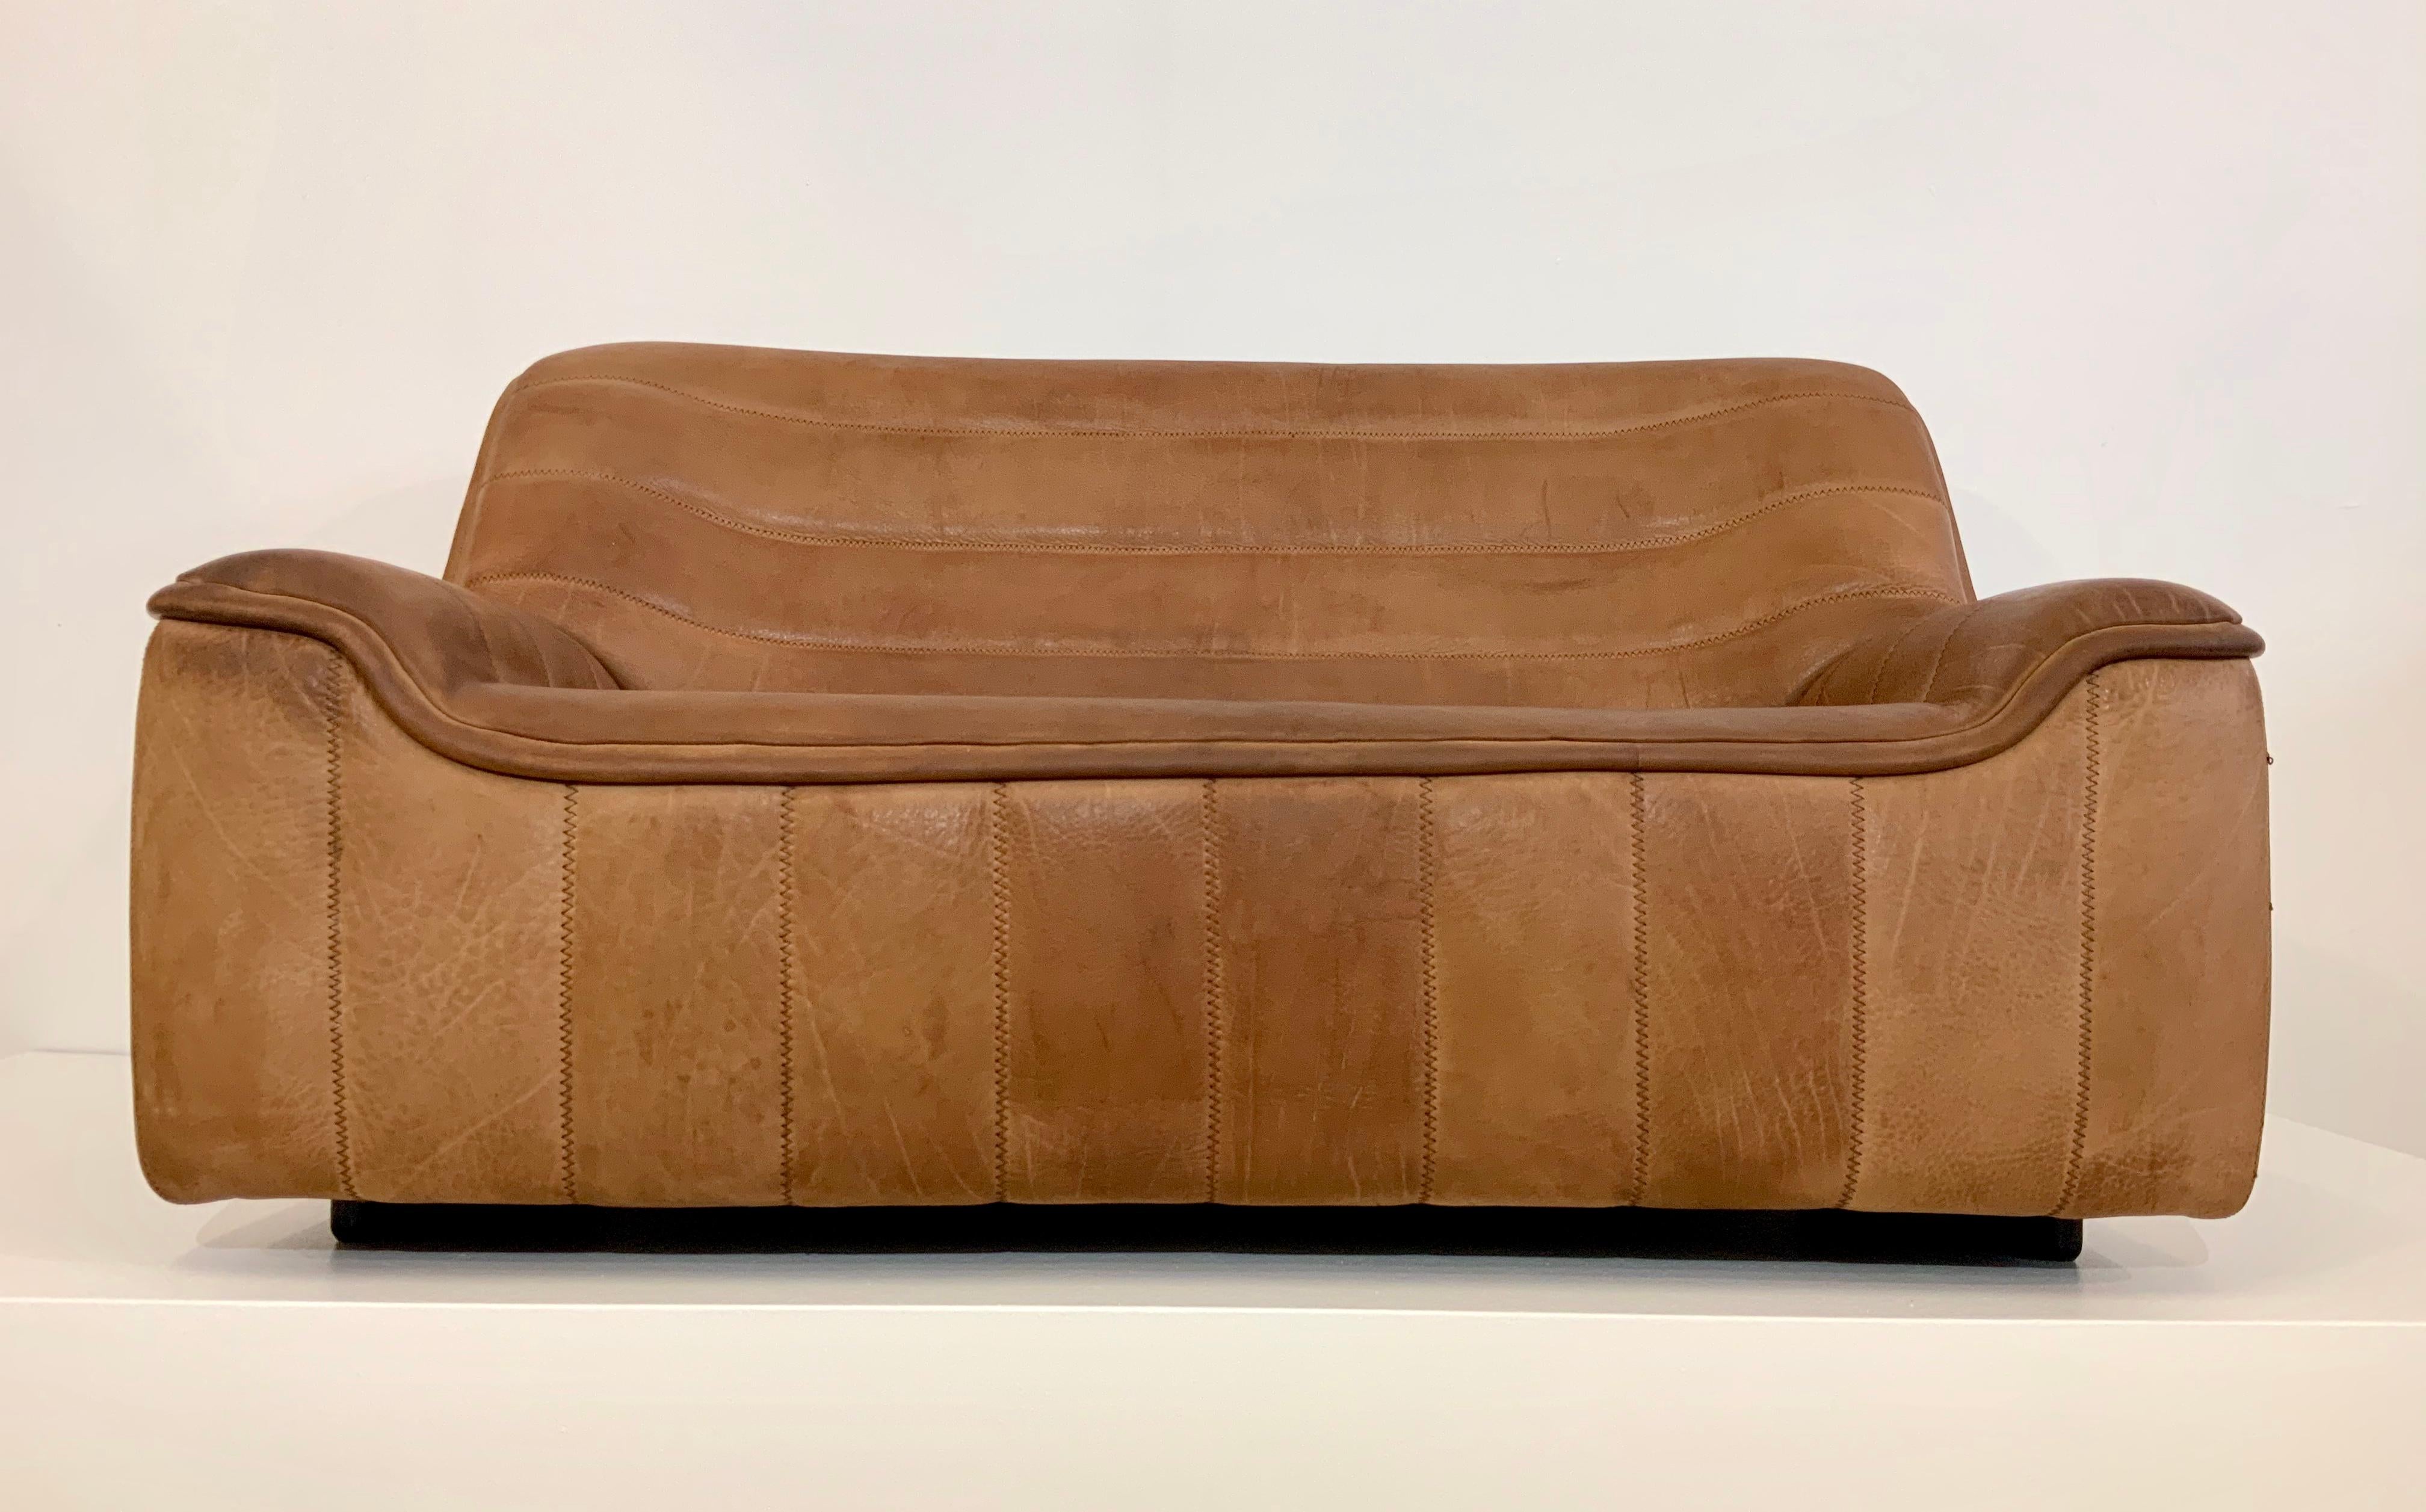 The vintage DS-84 model is a coveted and a very rare leather sofa Classic, designed in the midcentury era in early 1970s,
by the renowned leather craftsman manufacturer in Switzerland the luxury brand De Sede.

+ Perfect craftsmanship
+ Enough